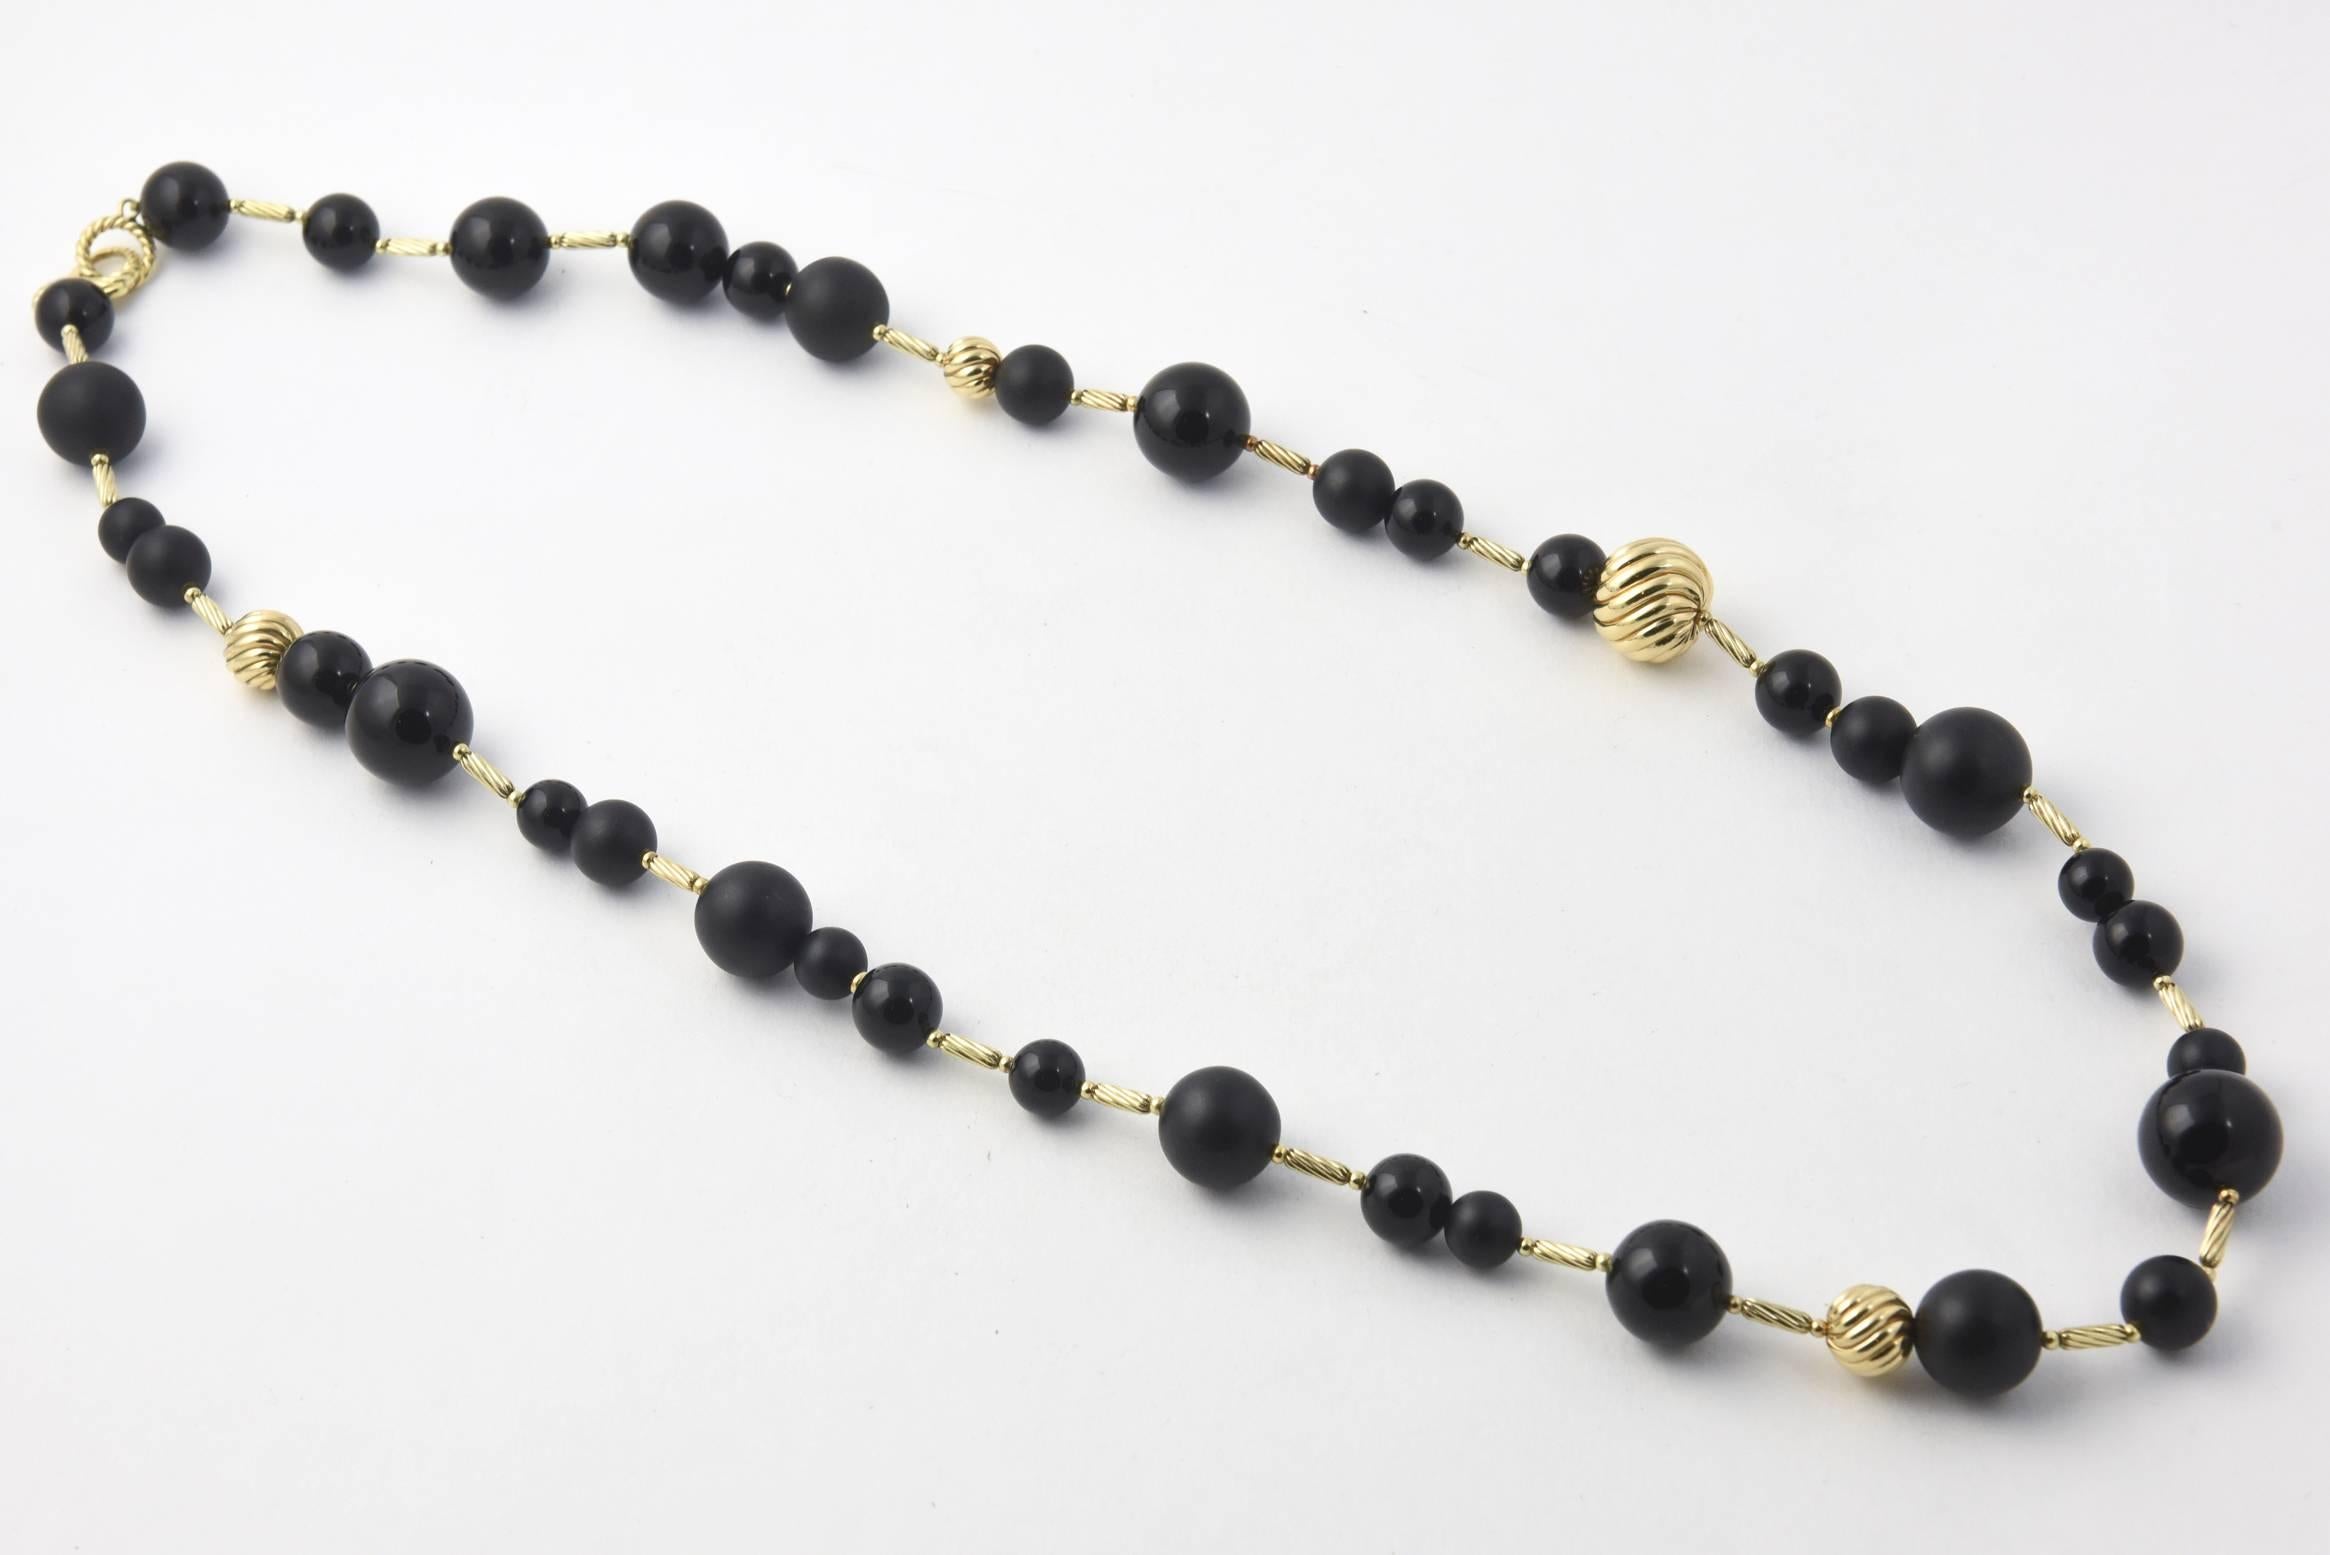 David Yurman Popcorn Necklace 32 inch onyx bead and 18k yellow gold ball & cable necklace with an 18k lobster clasp. This onyx and 18k gold necklace looks great.  All natural stones. As always black will go with everything.  Biggest bead is 18mm -